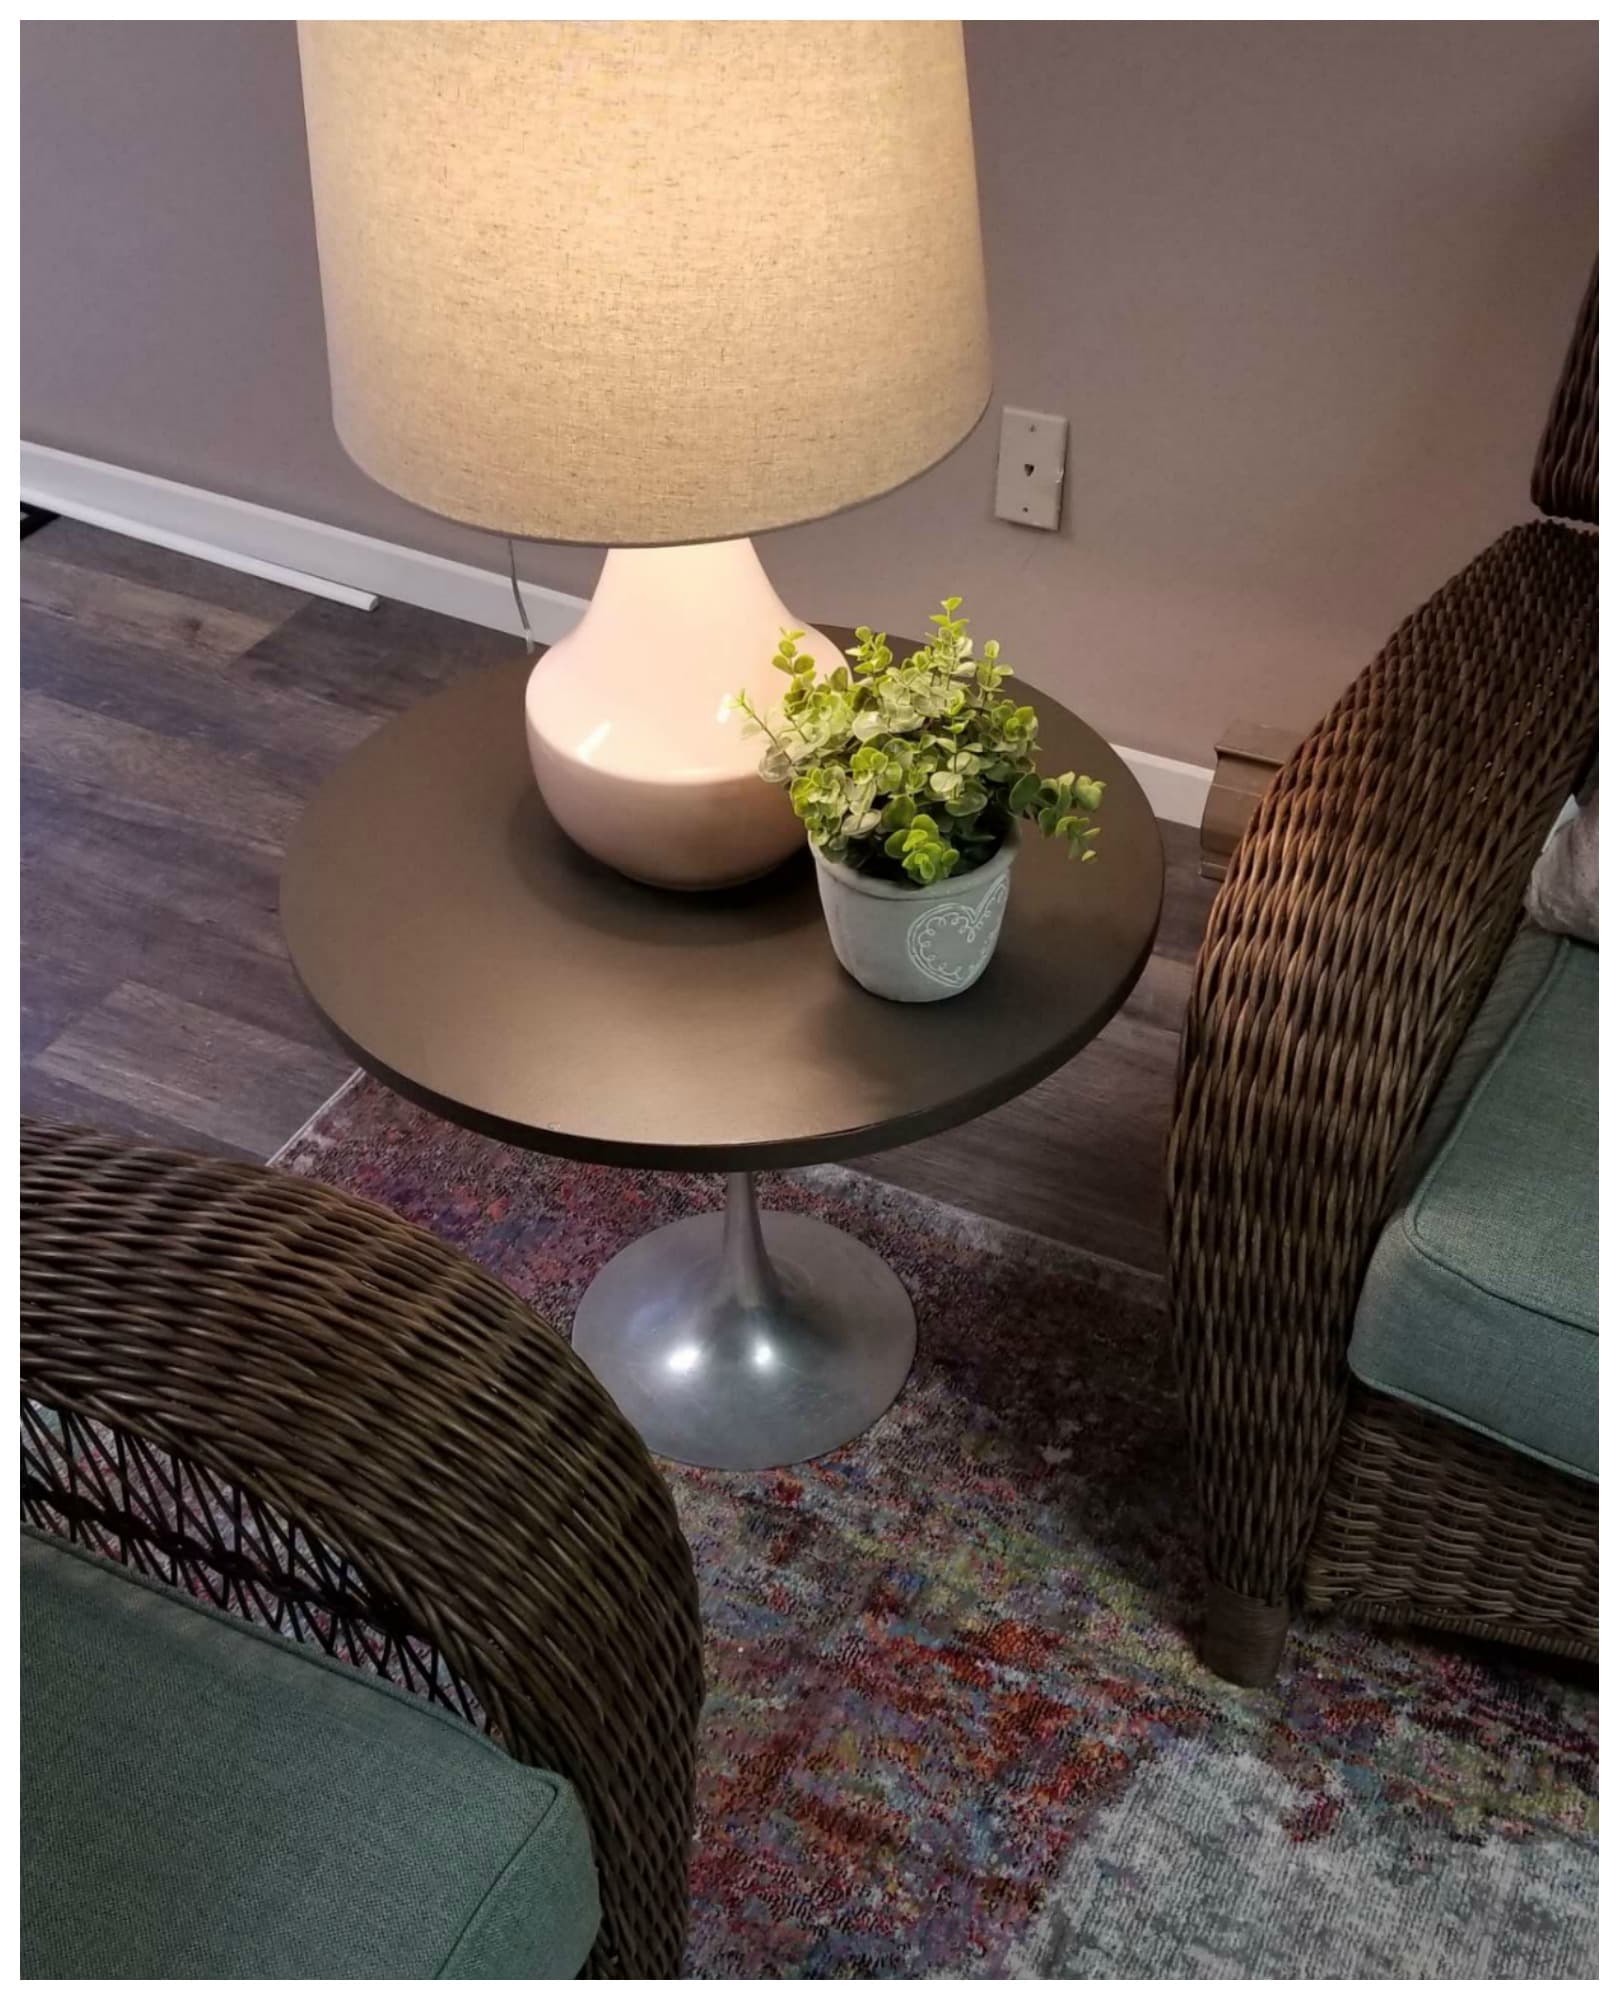 Why you should start asking "Does this spark joy?" - BASEMENT Living Area AFTER - Thrift Diving